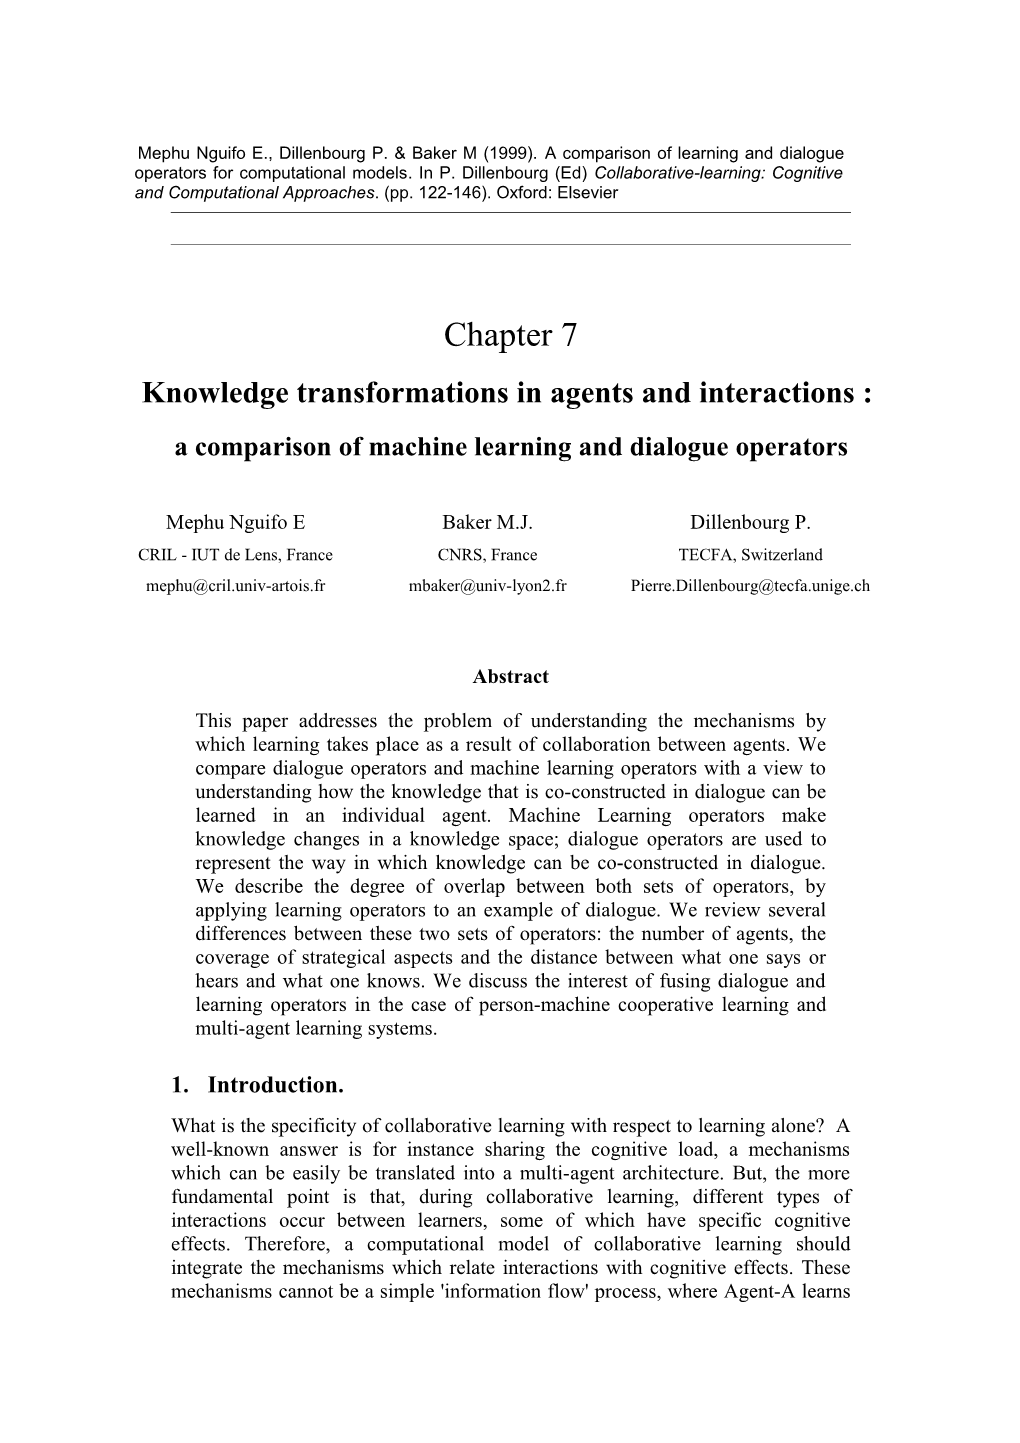 Knowledge Transformations in Agents and Interactions